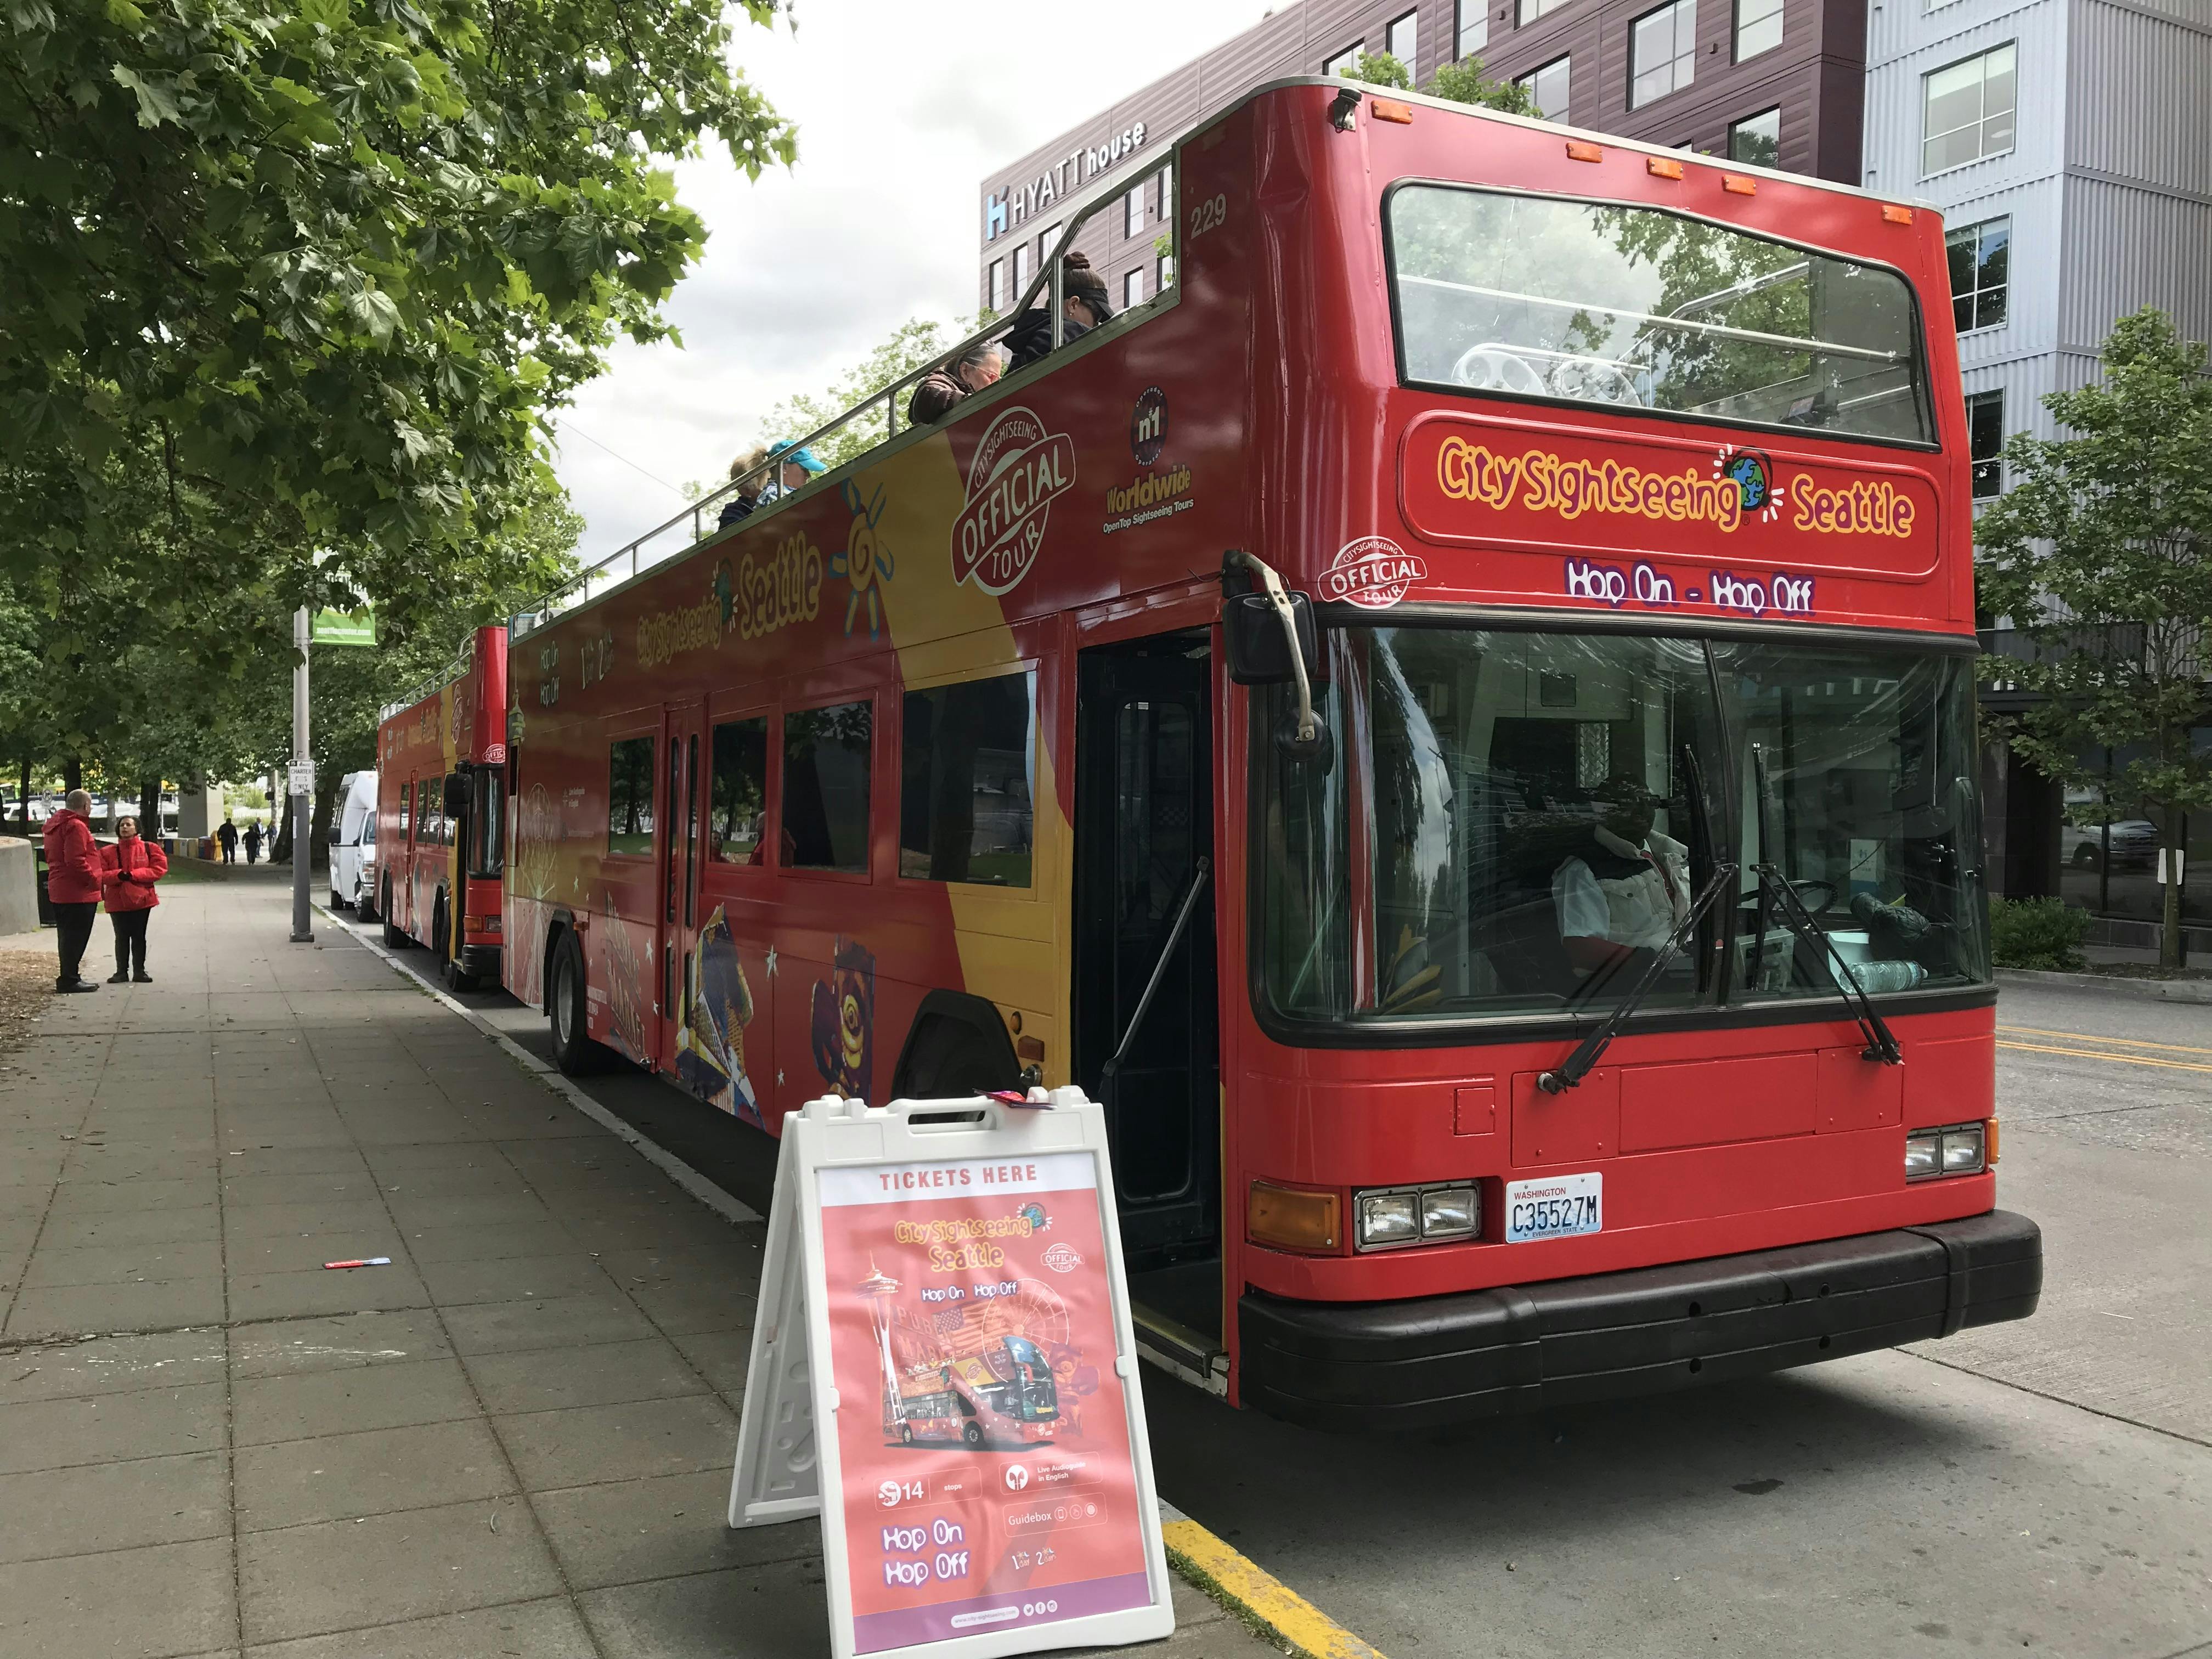 City Sightseeing hop-on hop-off bus tour of Seattle